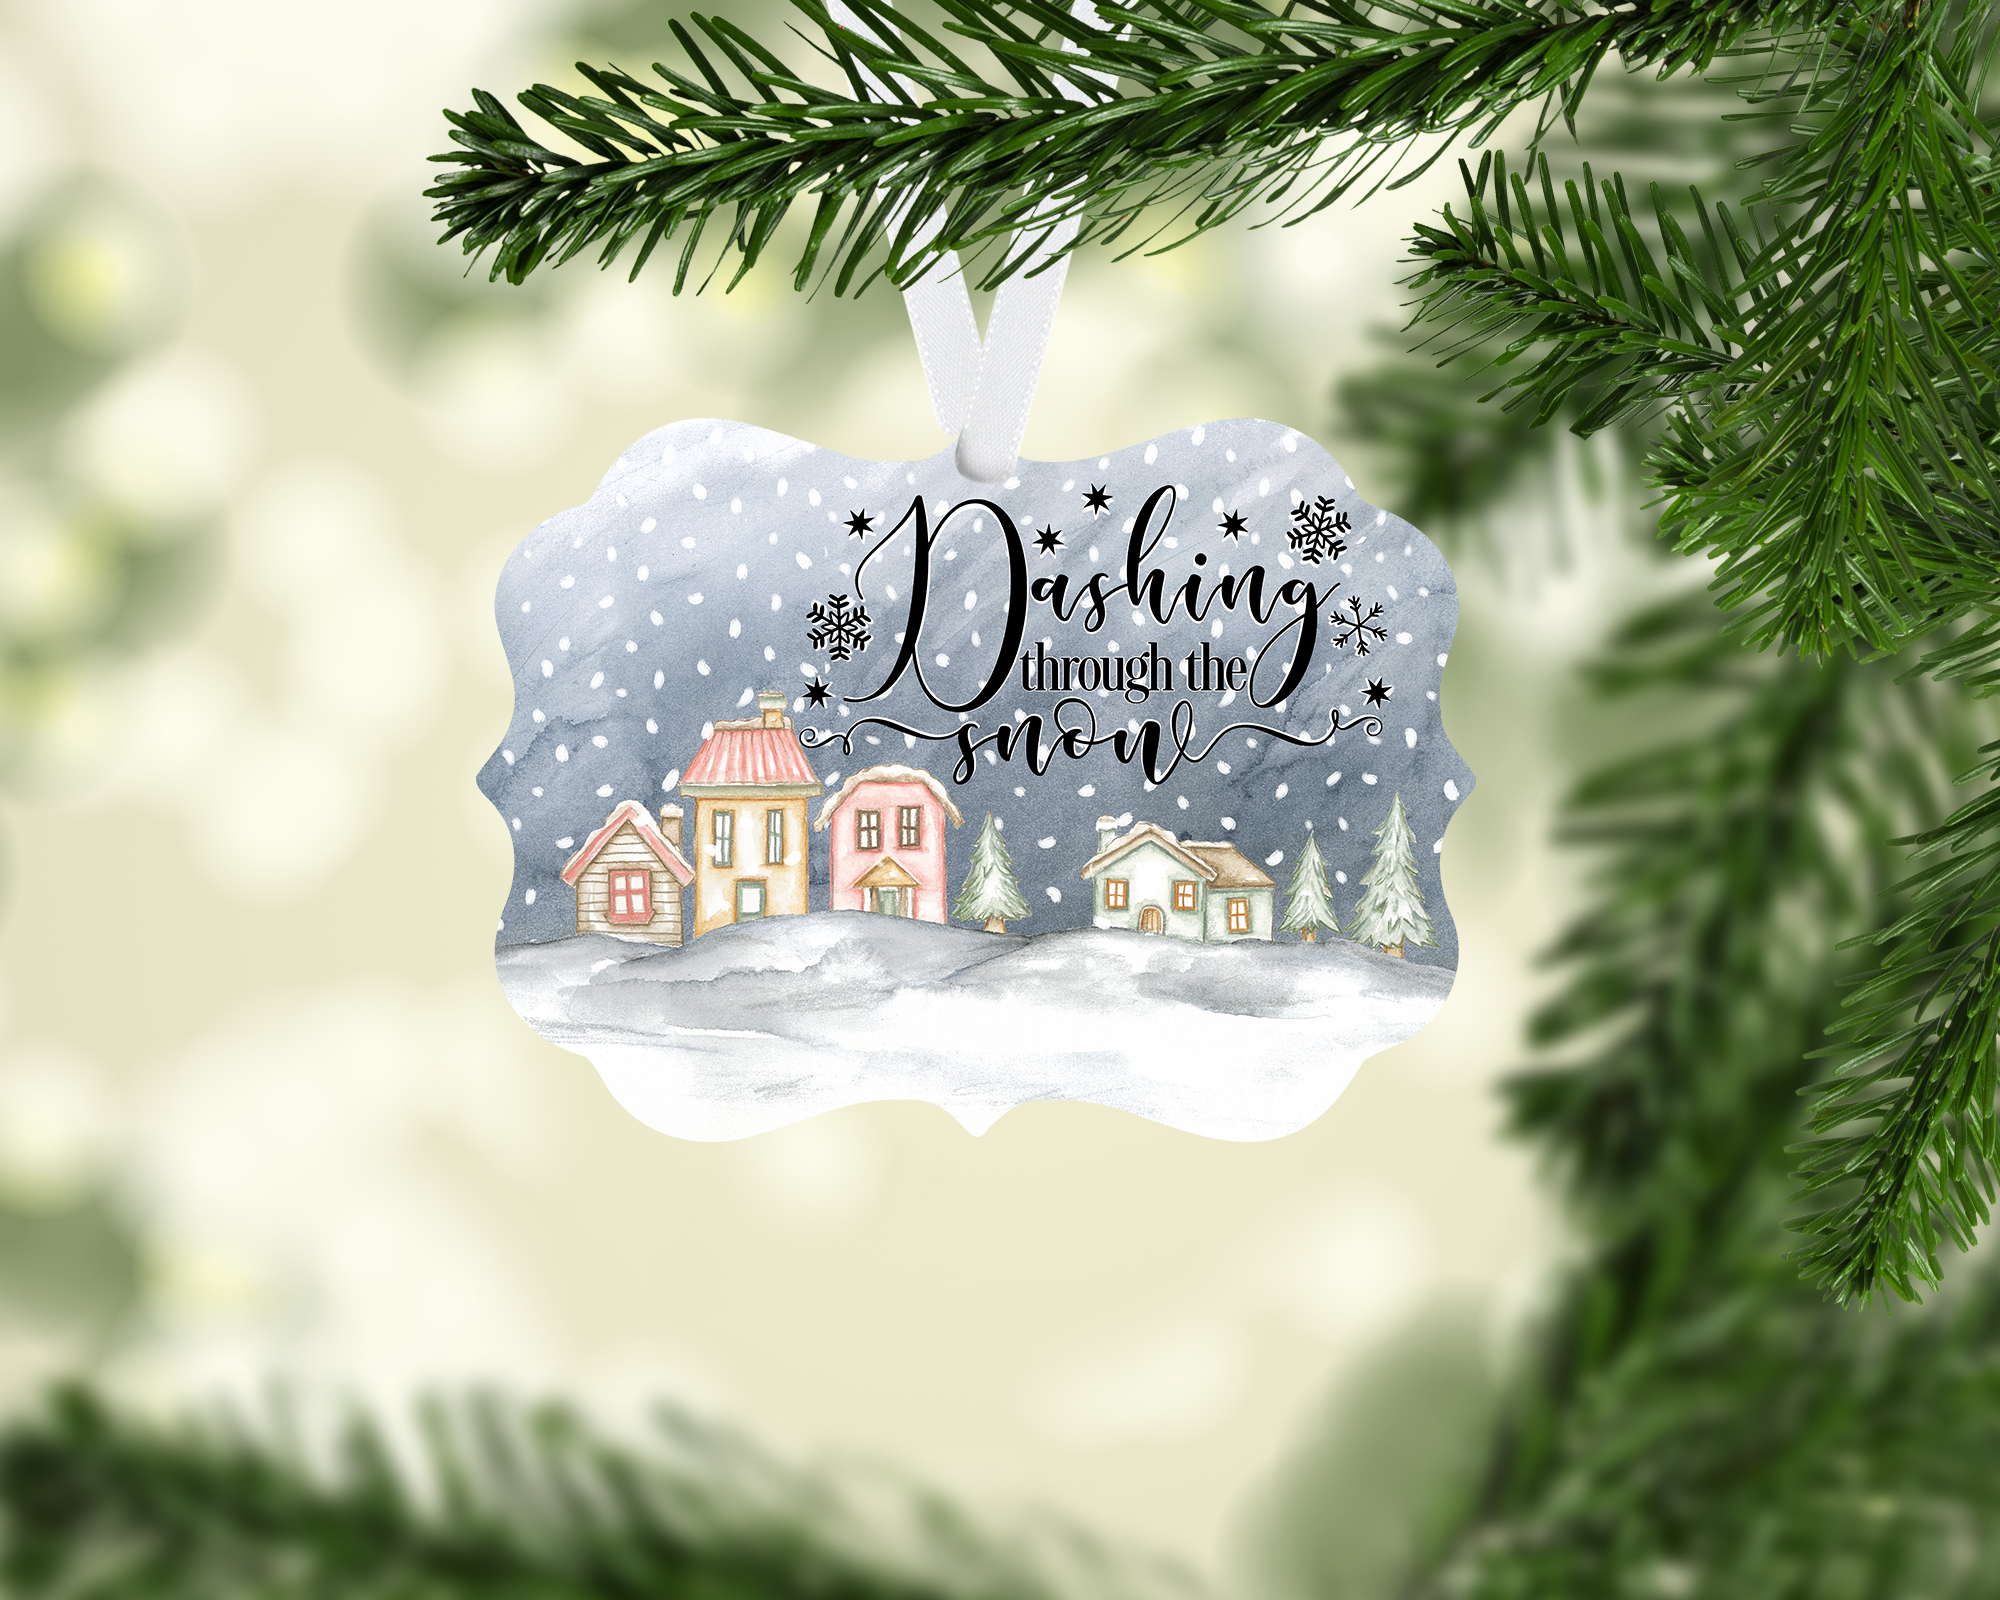 (Instant Print) Digital Download - Dashing through the snow  -  design made for our blanks